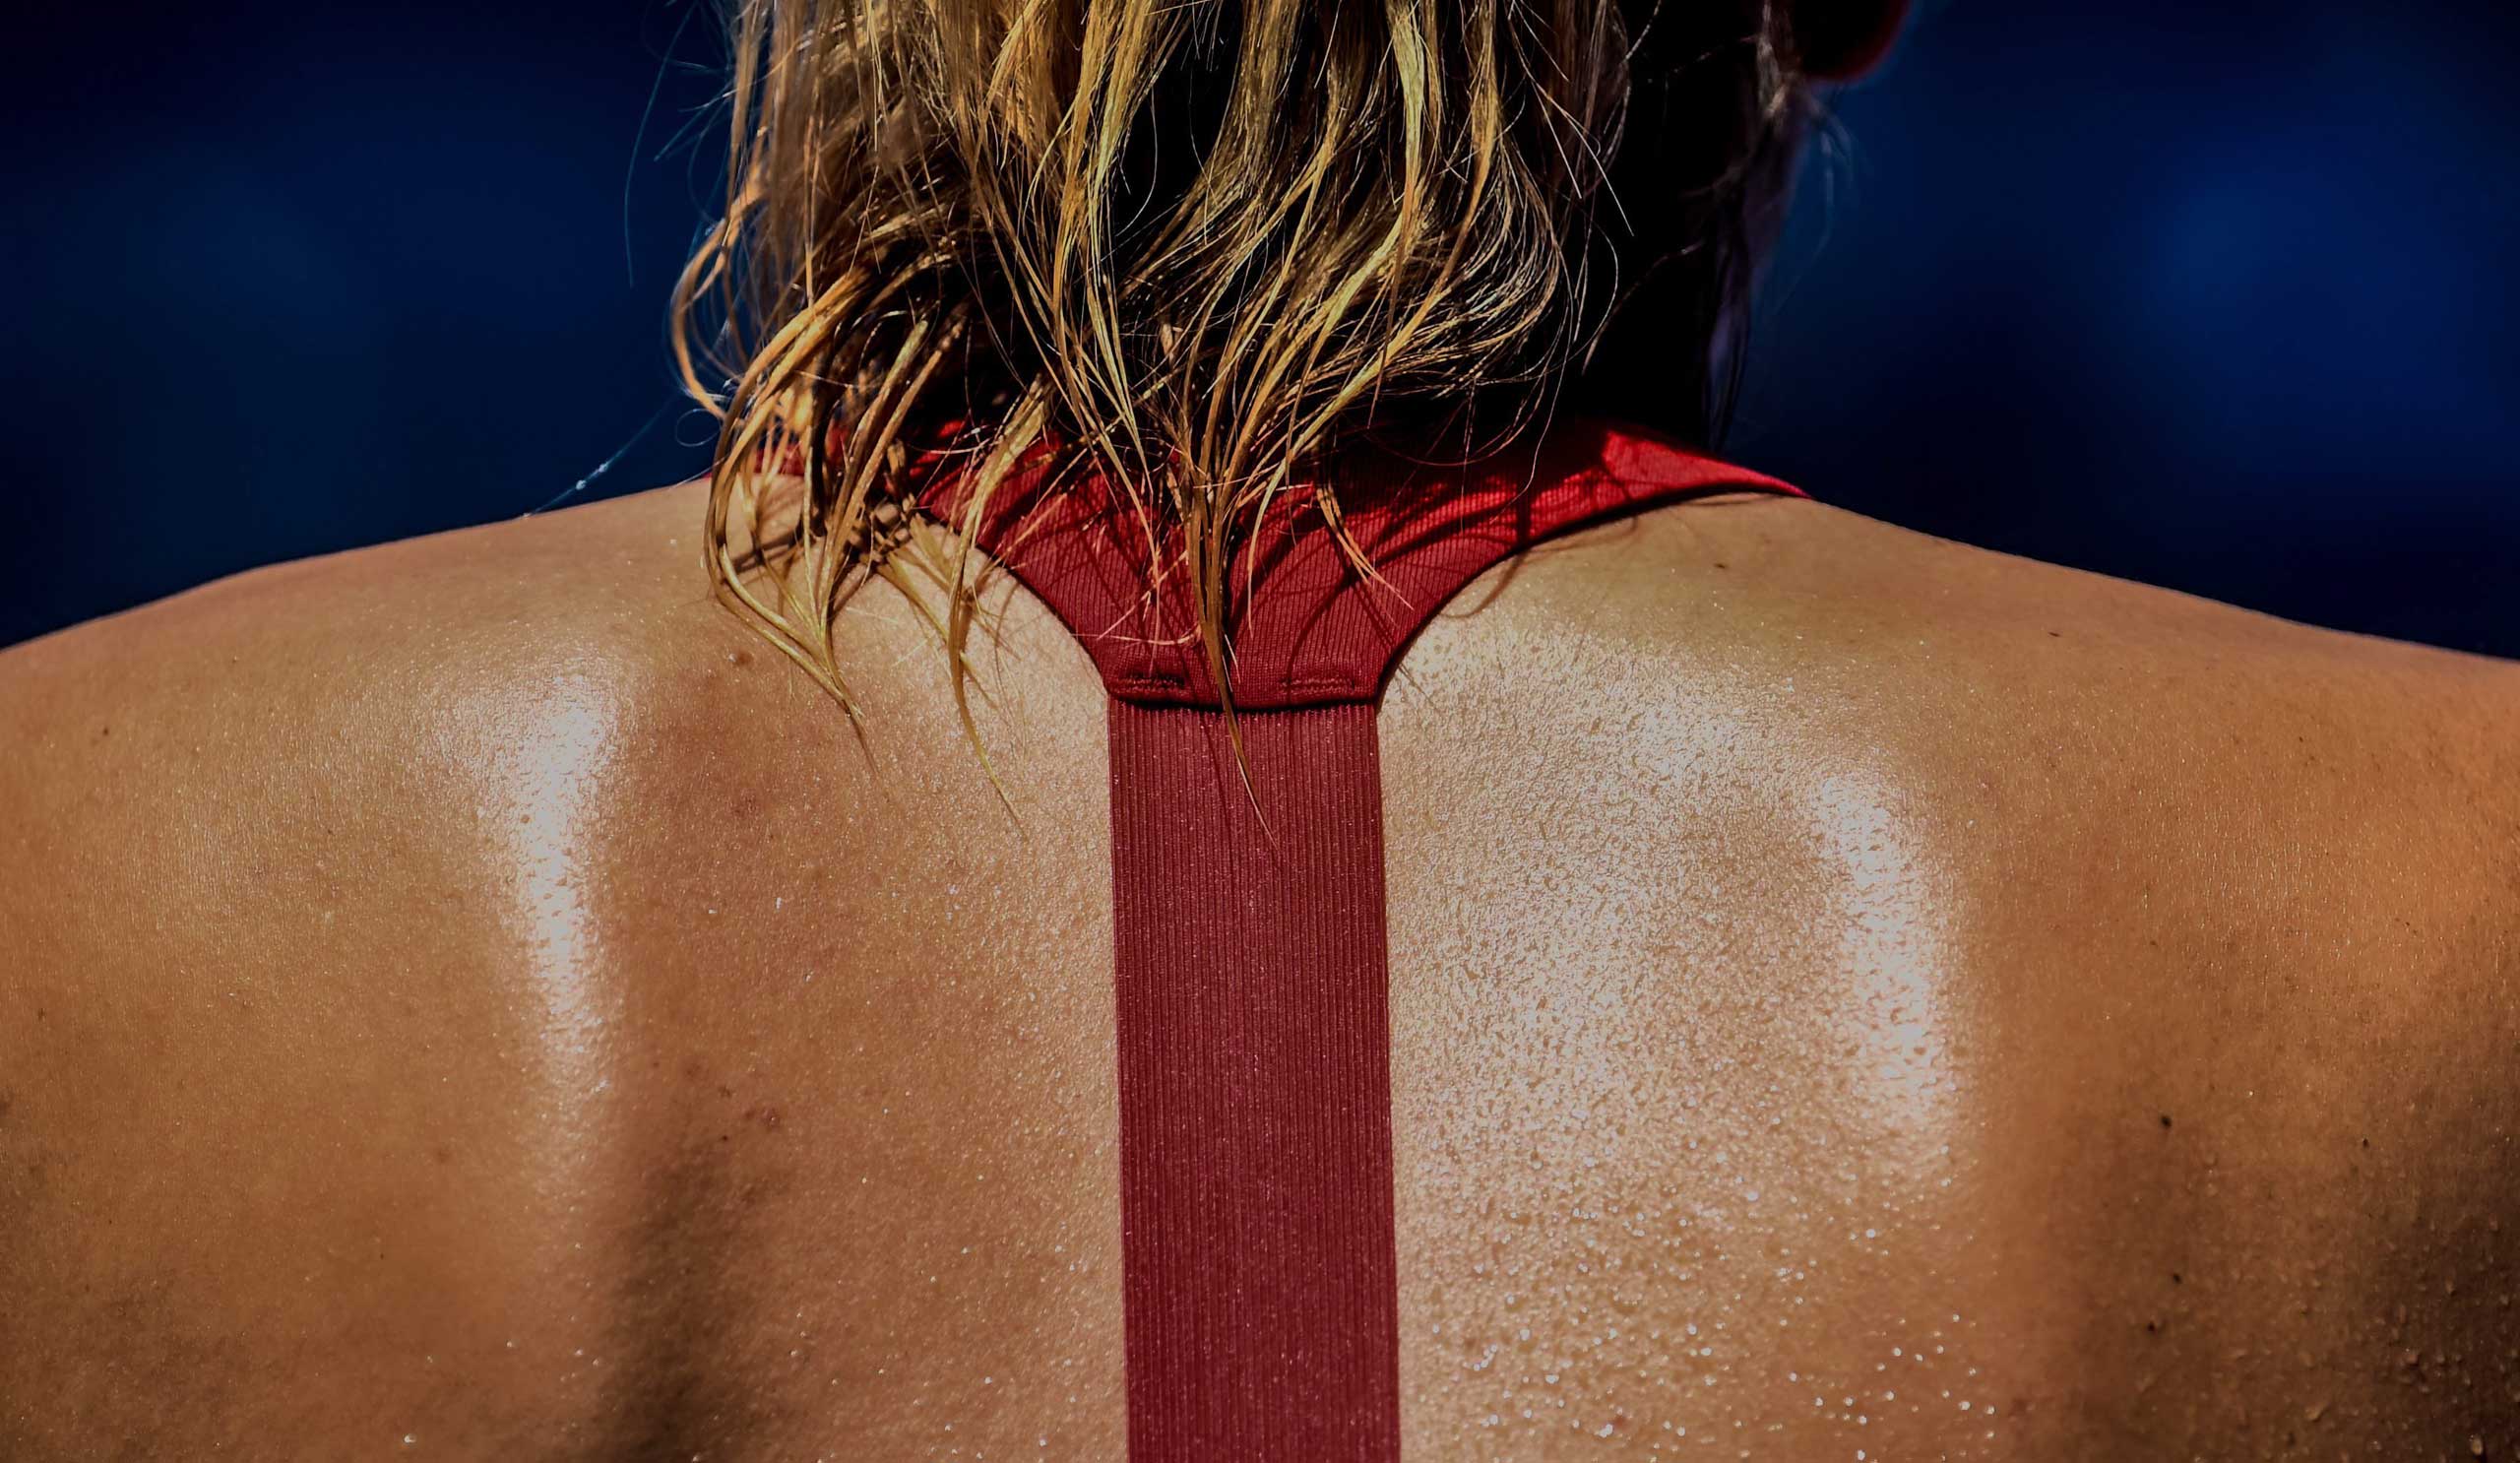 Jan. 21, 2015. The back of Maria Sharapova of Russia, is pictured as she plays against Alexandra Panova, also of Russia, during their second round match at the Australian Open Grand Slam tennis tournament in Melbourne.